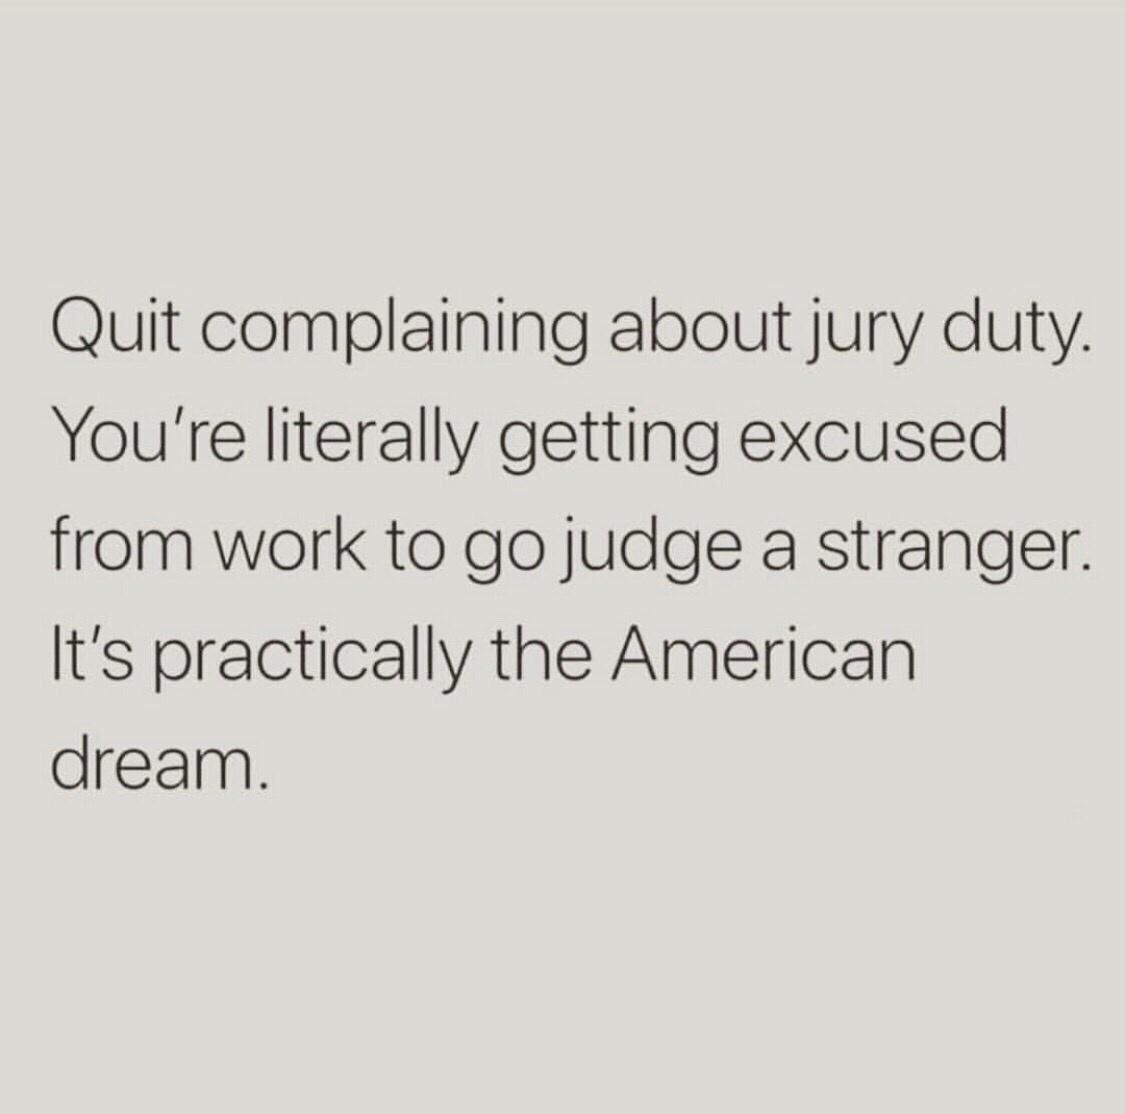 monday morning randomness - family guy spanish meme - Quit complaining about jury duty. You're literally getting excused from work to go judge a stranger. It's practically the American dream.